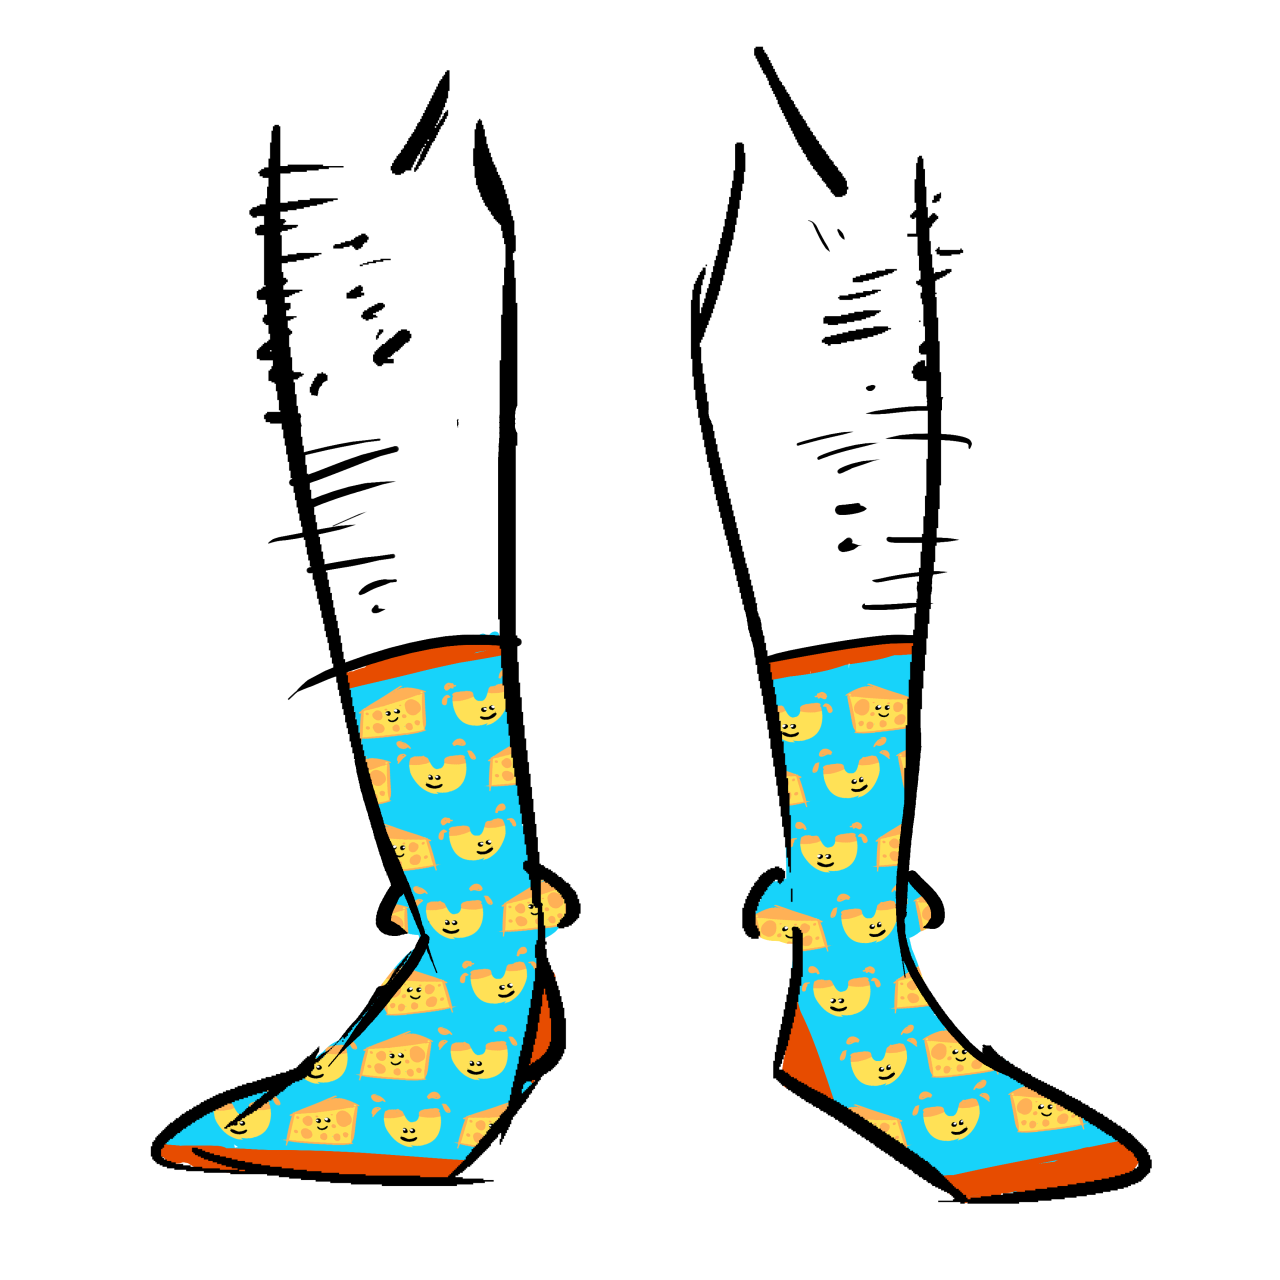 Blue socks with red toe band and red calf band. The pattern is a noodle and wedge of cheese.